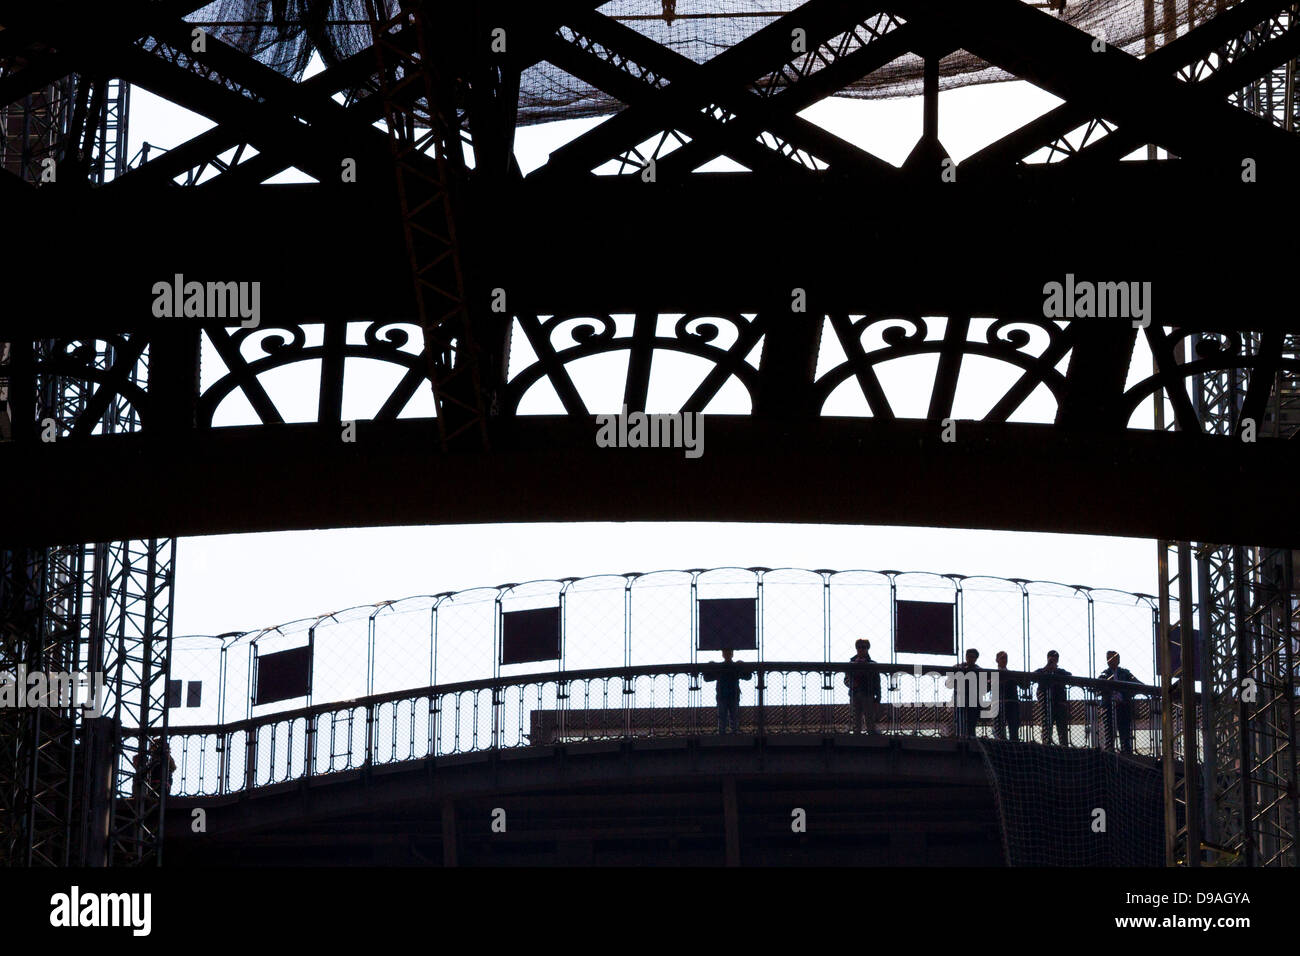 Silhouette of people looking out from first level platform of Eiffel Tower surrounded by decorative ironwork Stock Photo